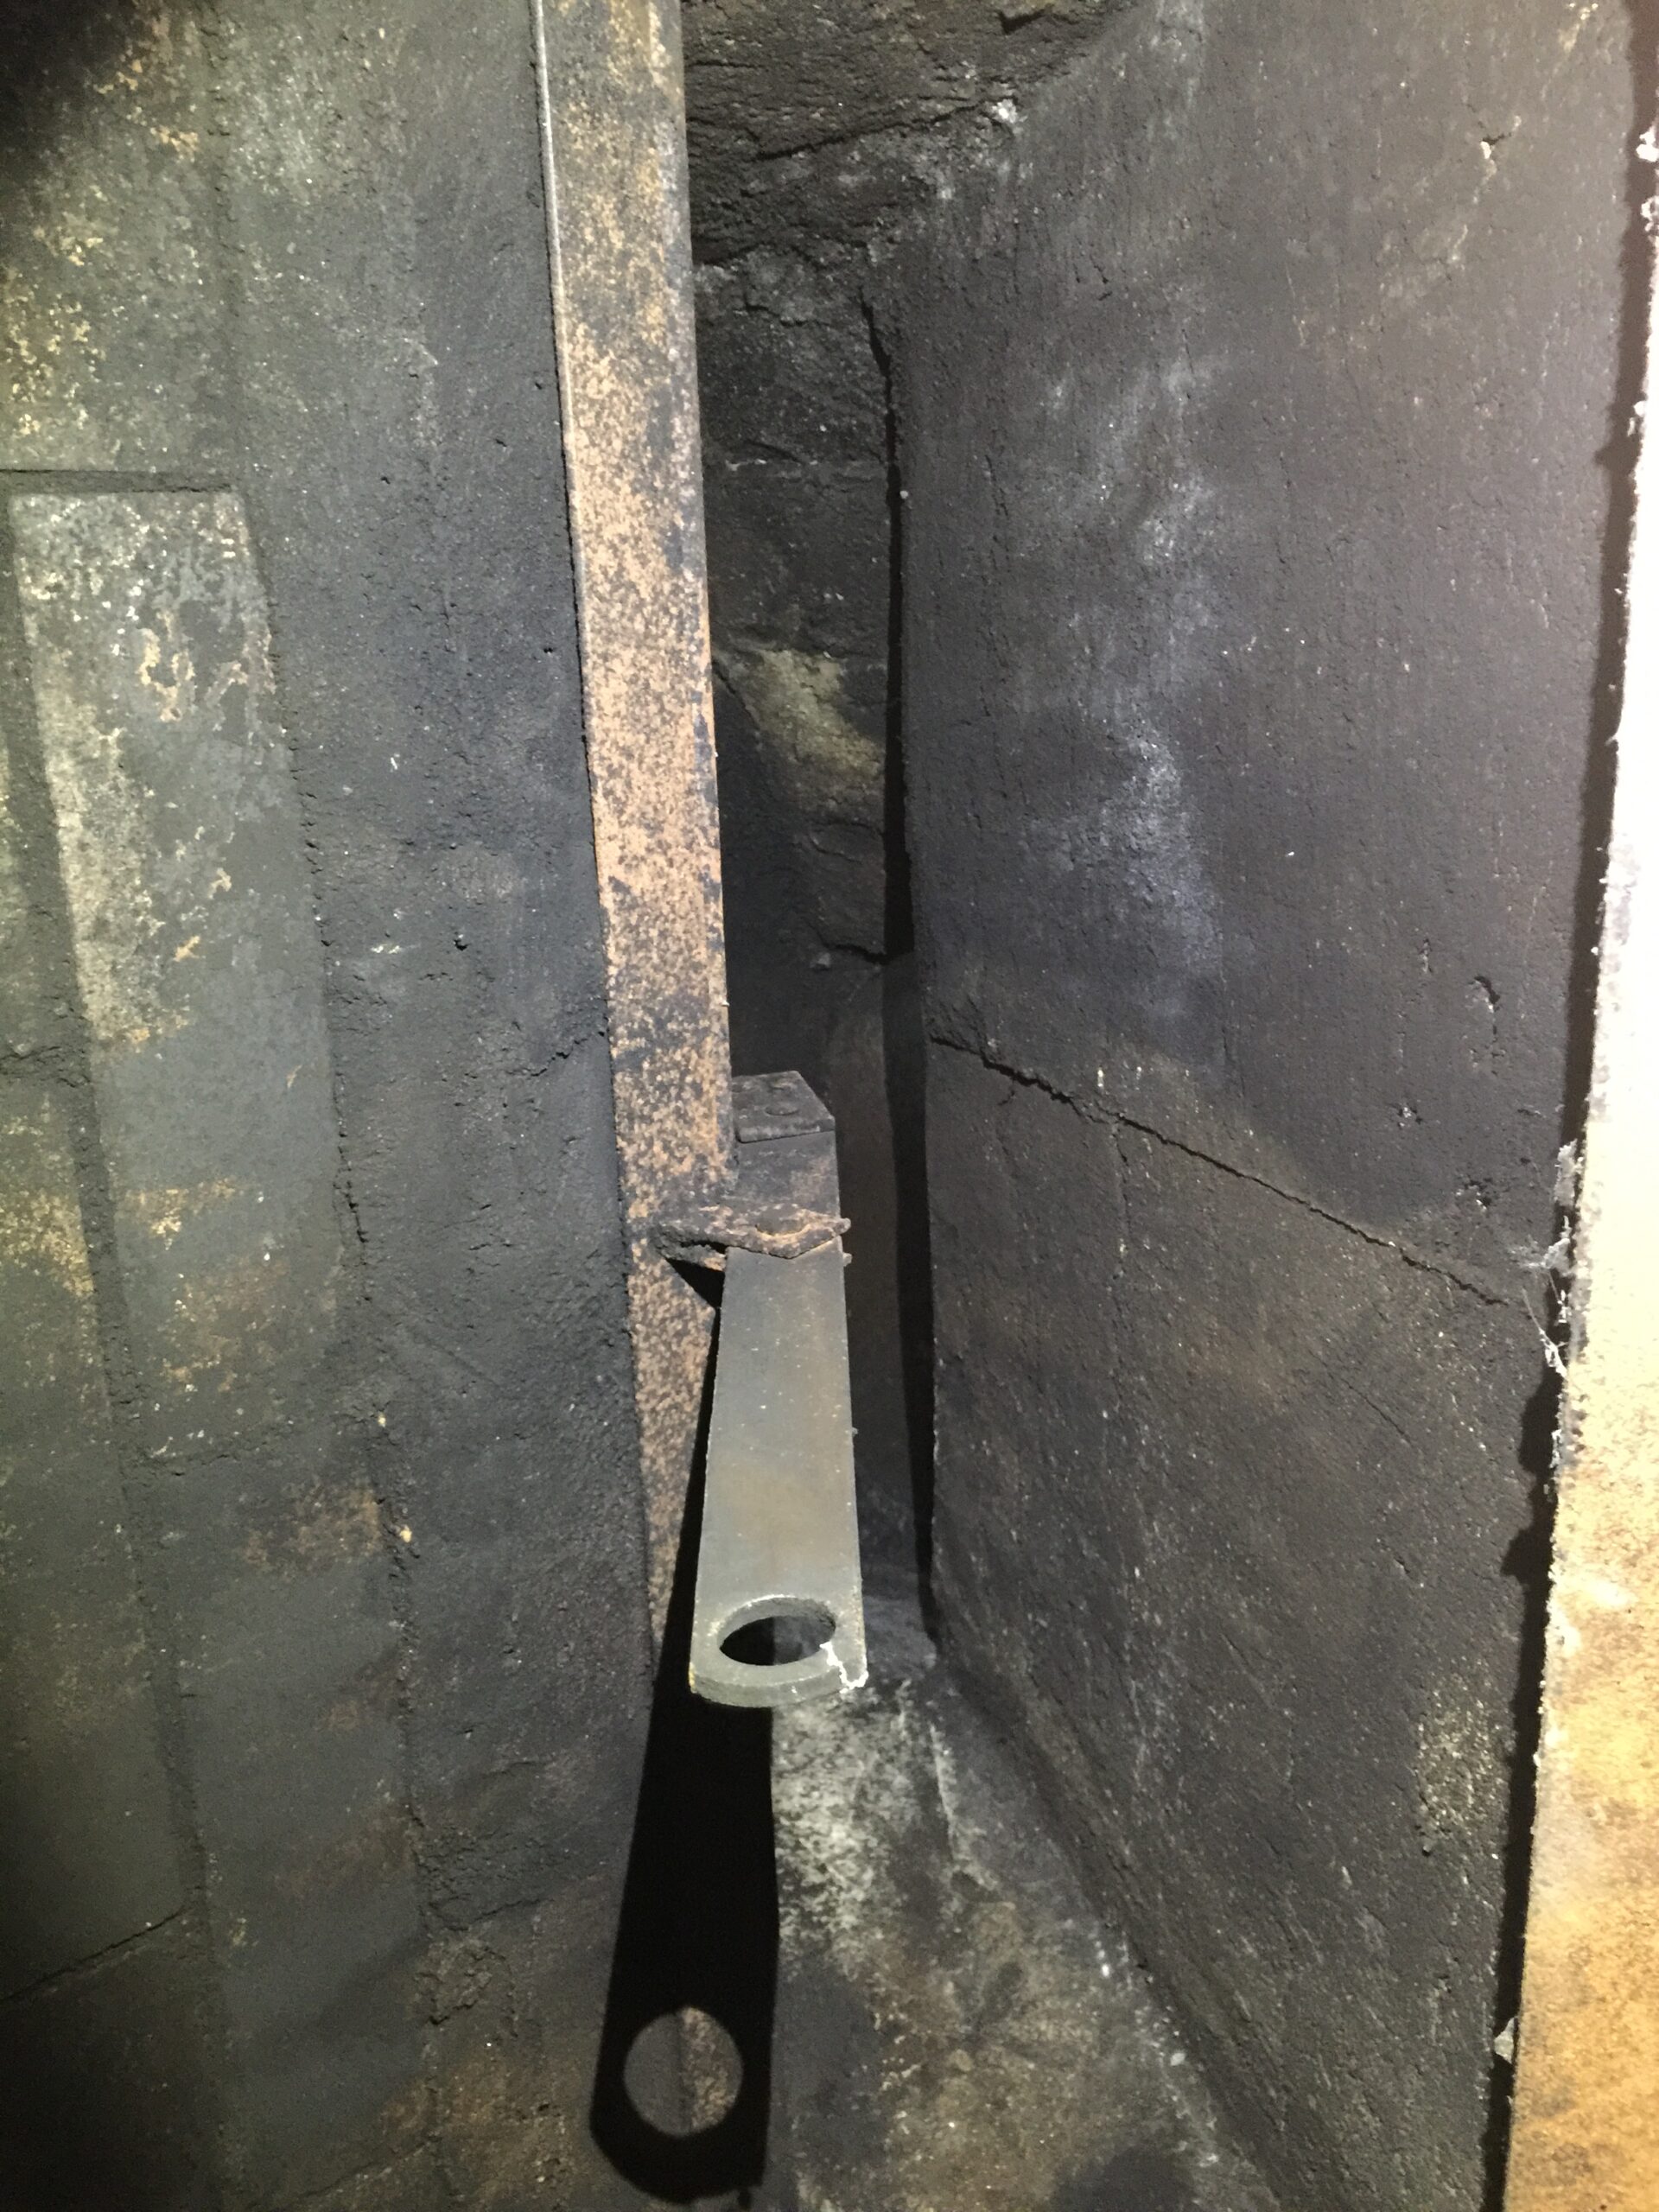 Chimney flue cleaned by A-1 Duct Cleaning & Chimney Sweep in Orange County, CA